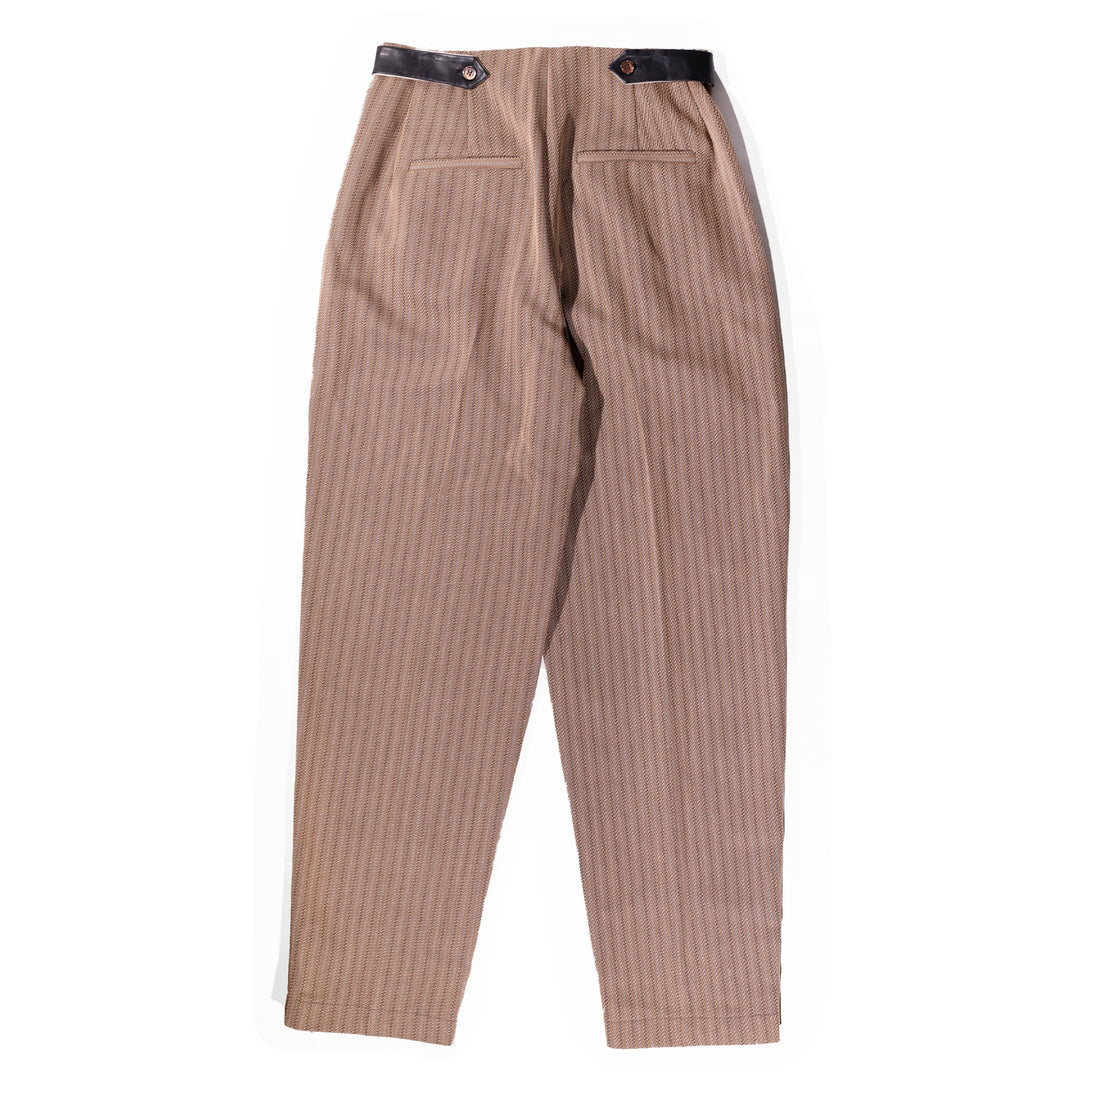 Diotima Gorge Trouser in Taupe